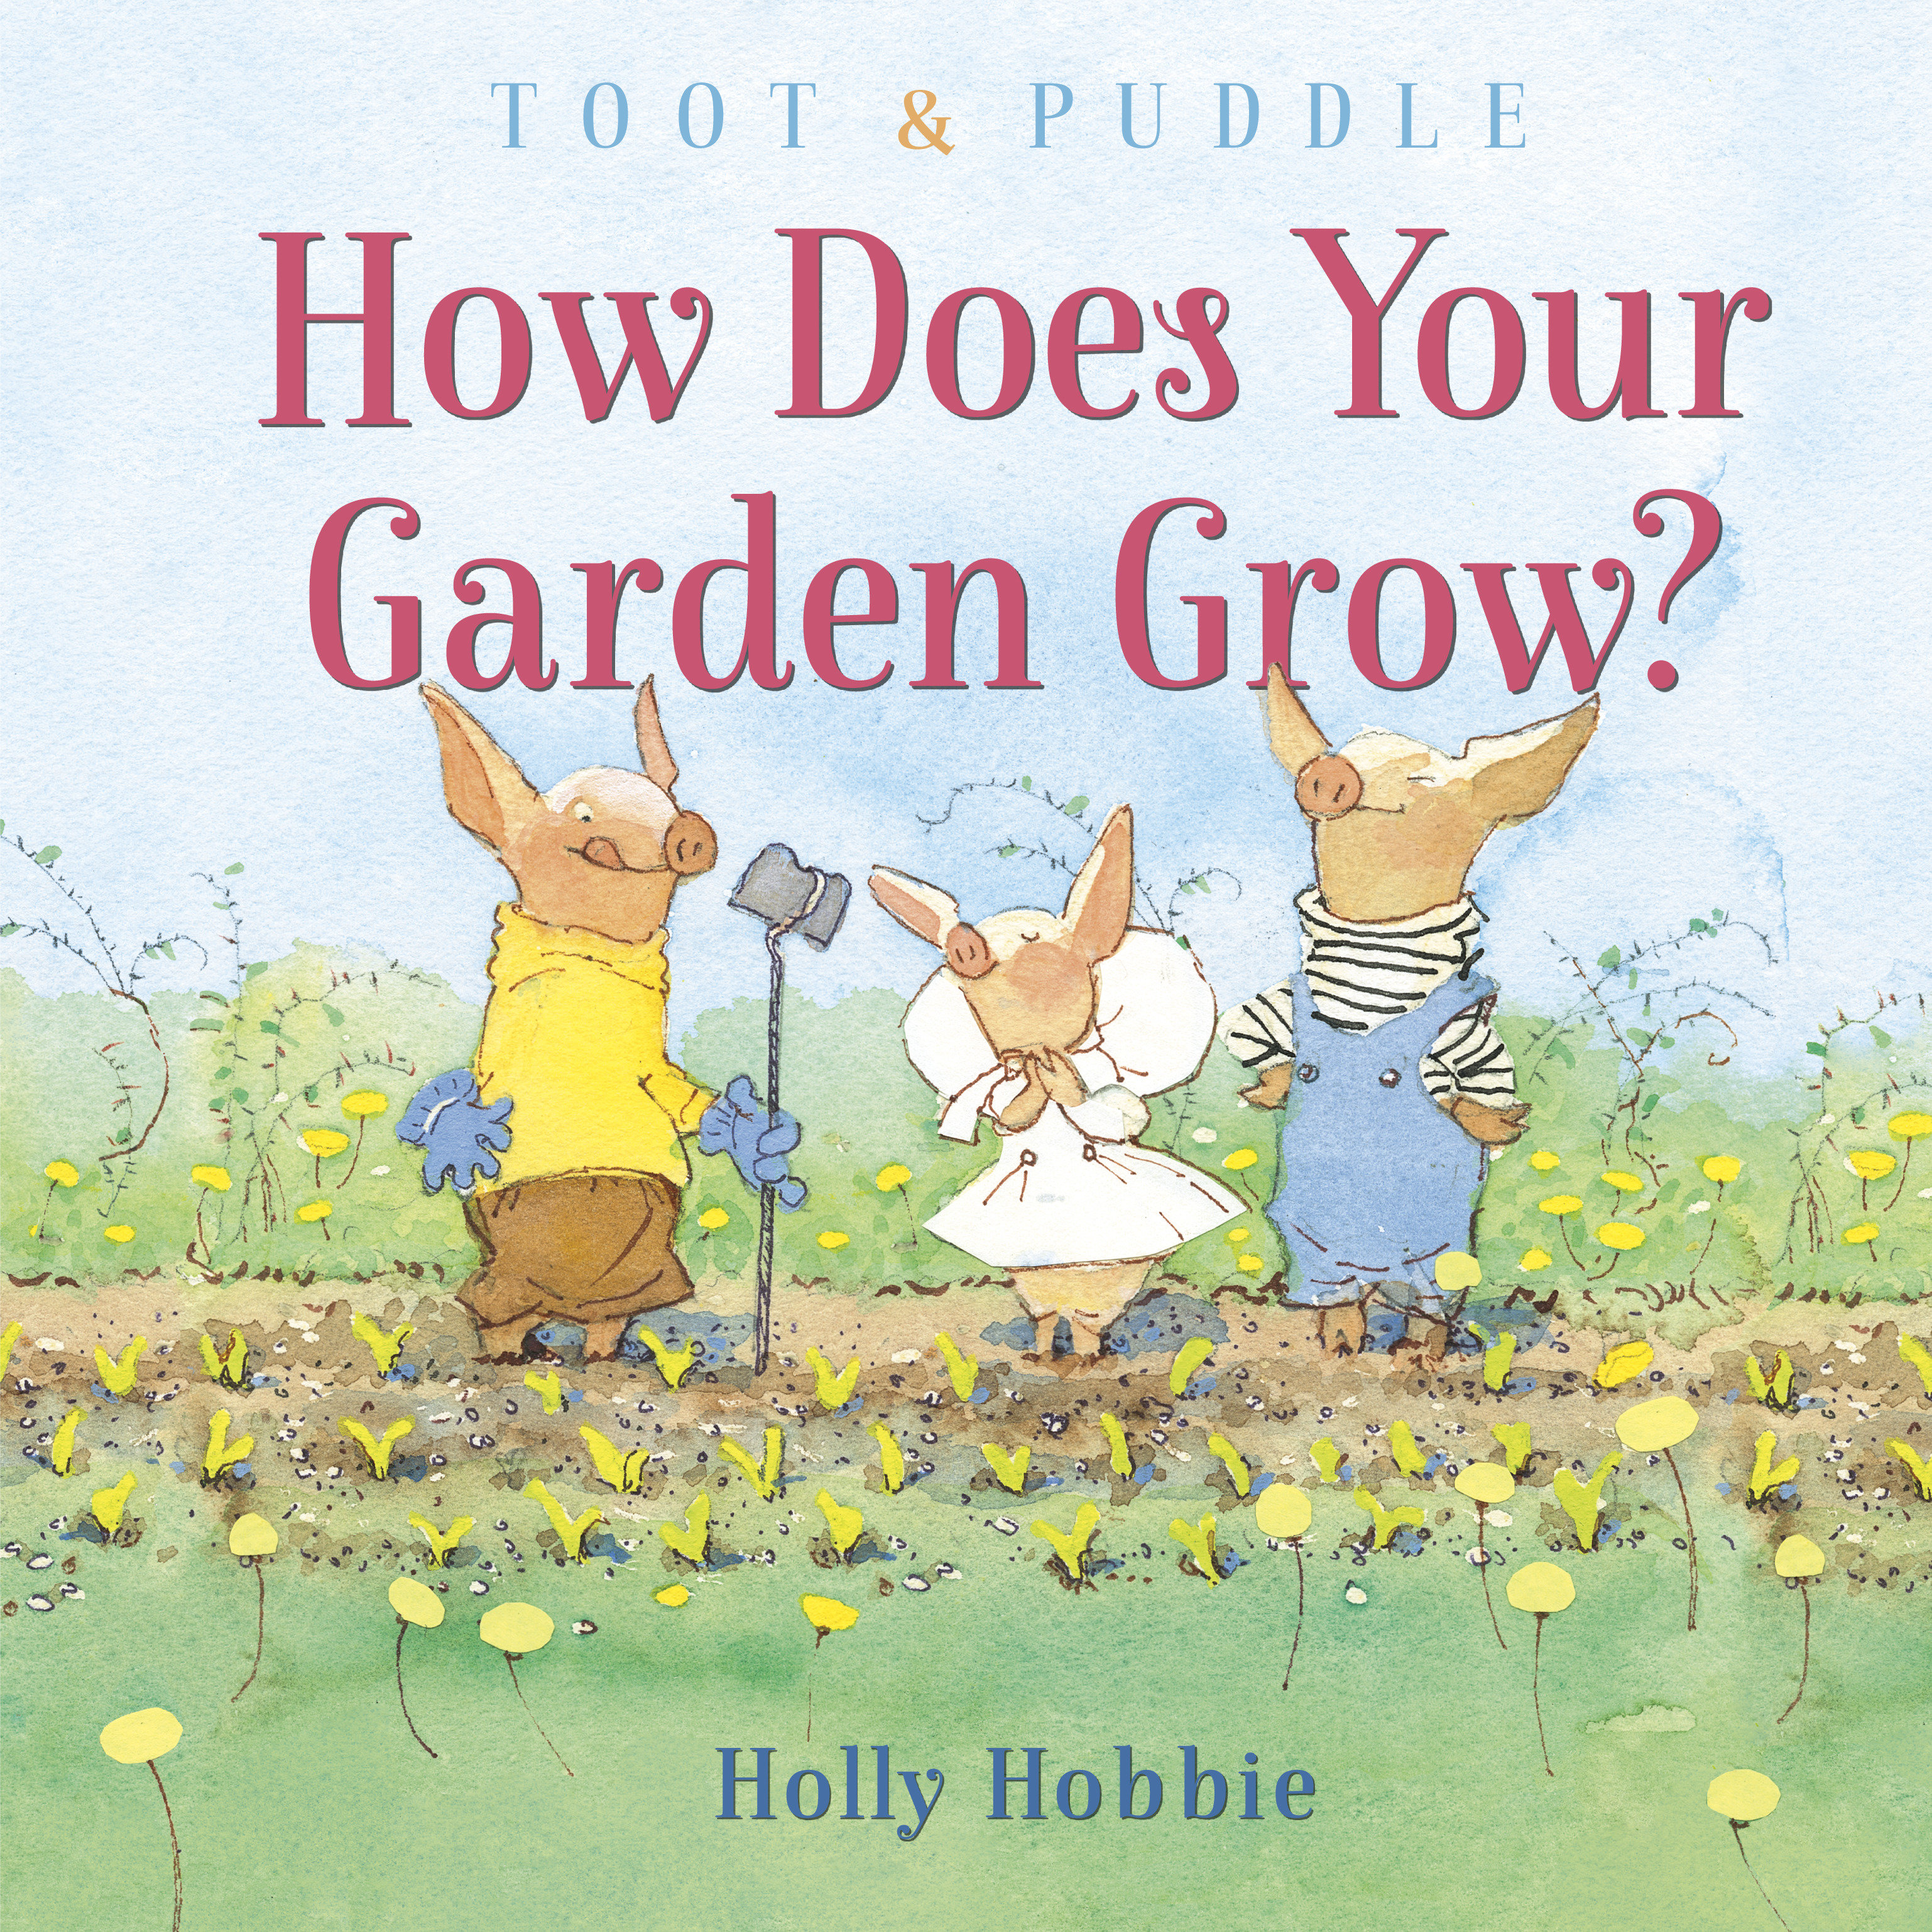 Toot & Puddle: How Does Your Garden Grow? (Hardcover Book)